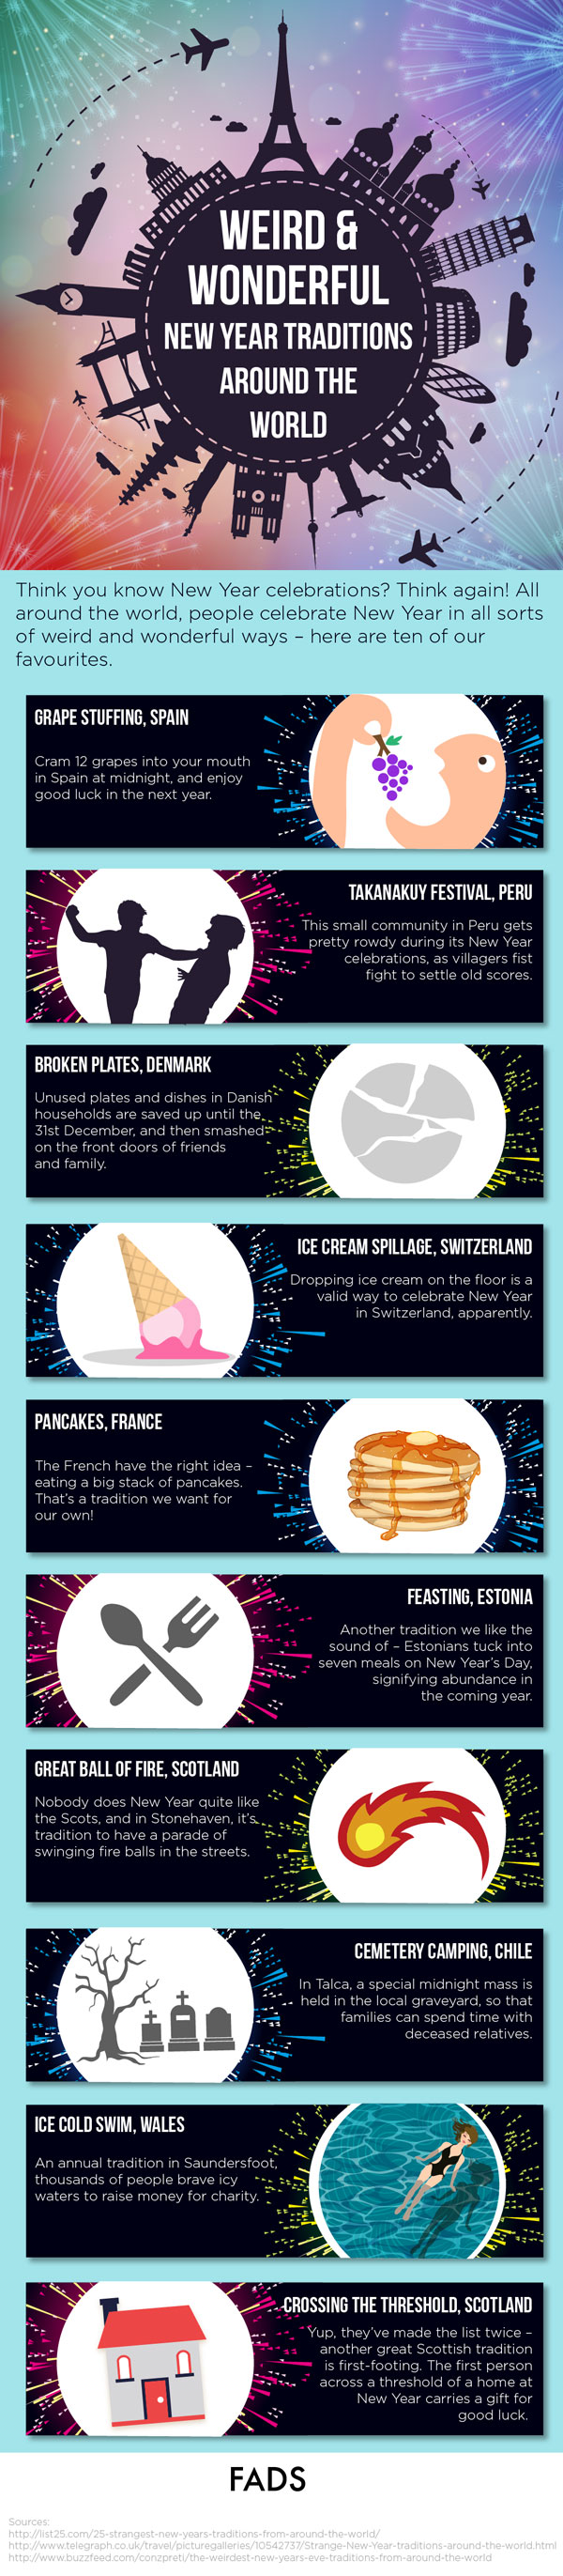 Infographic: Weird and Wonderful New Year Traditions - FADS